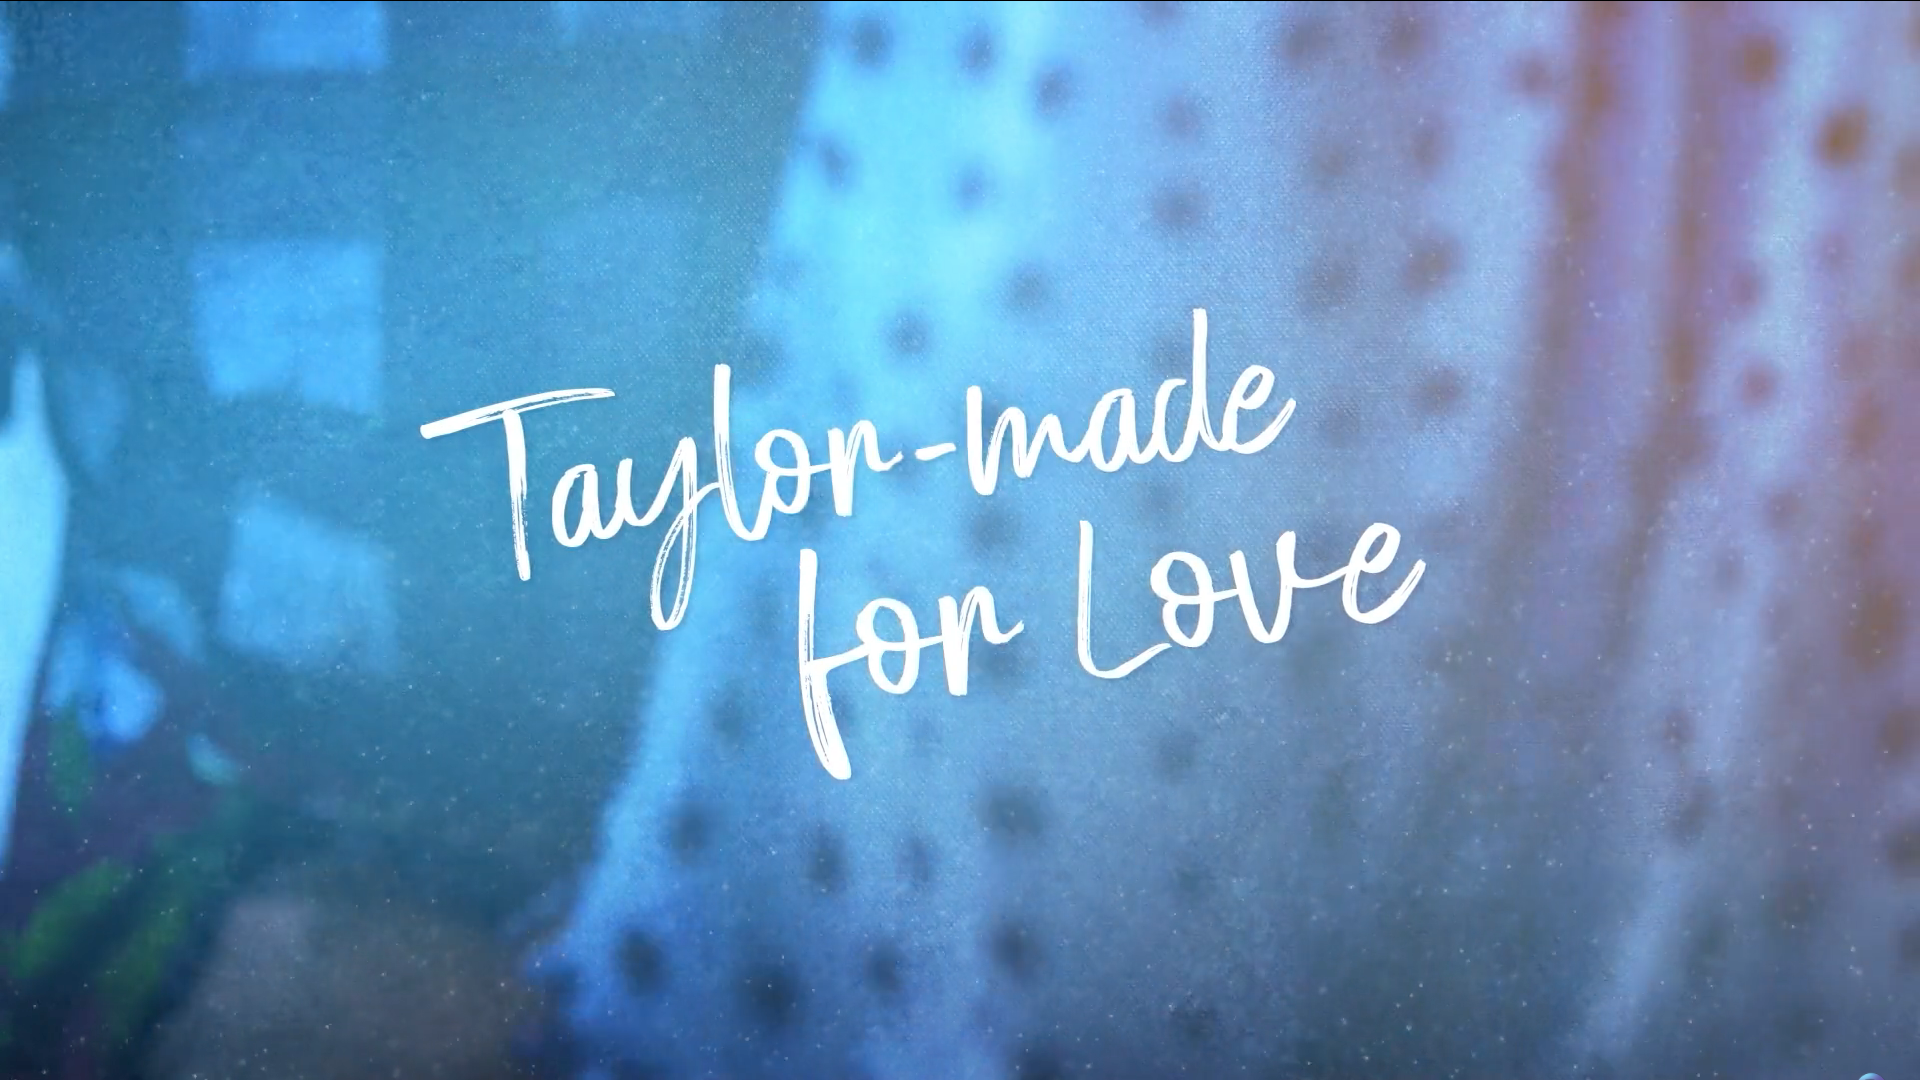 Text: Taylor-made for Love with blue background